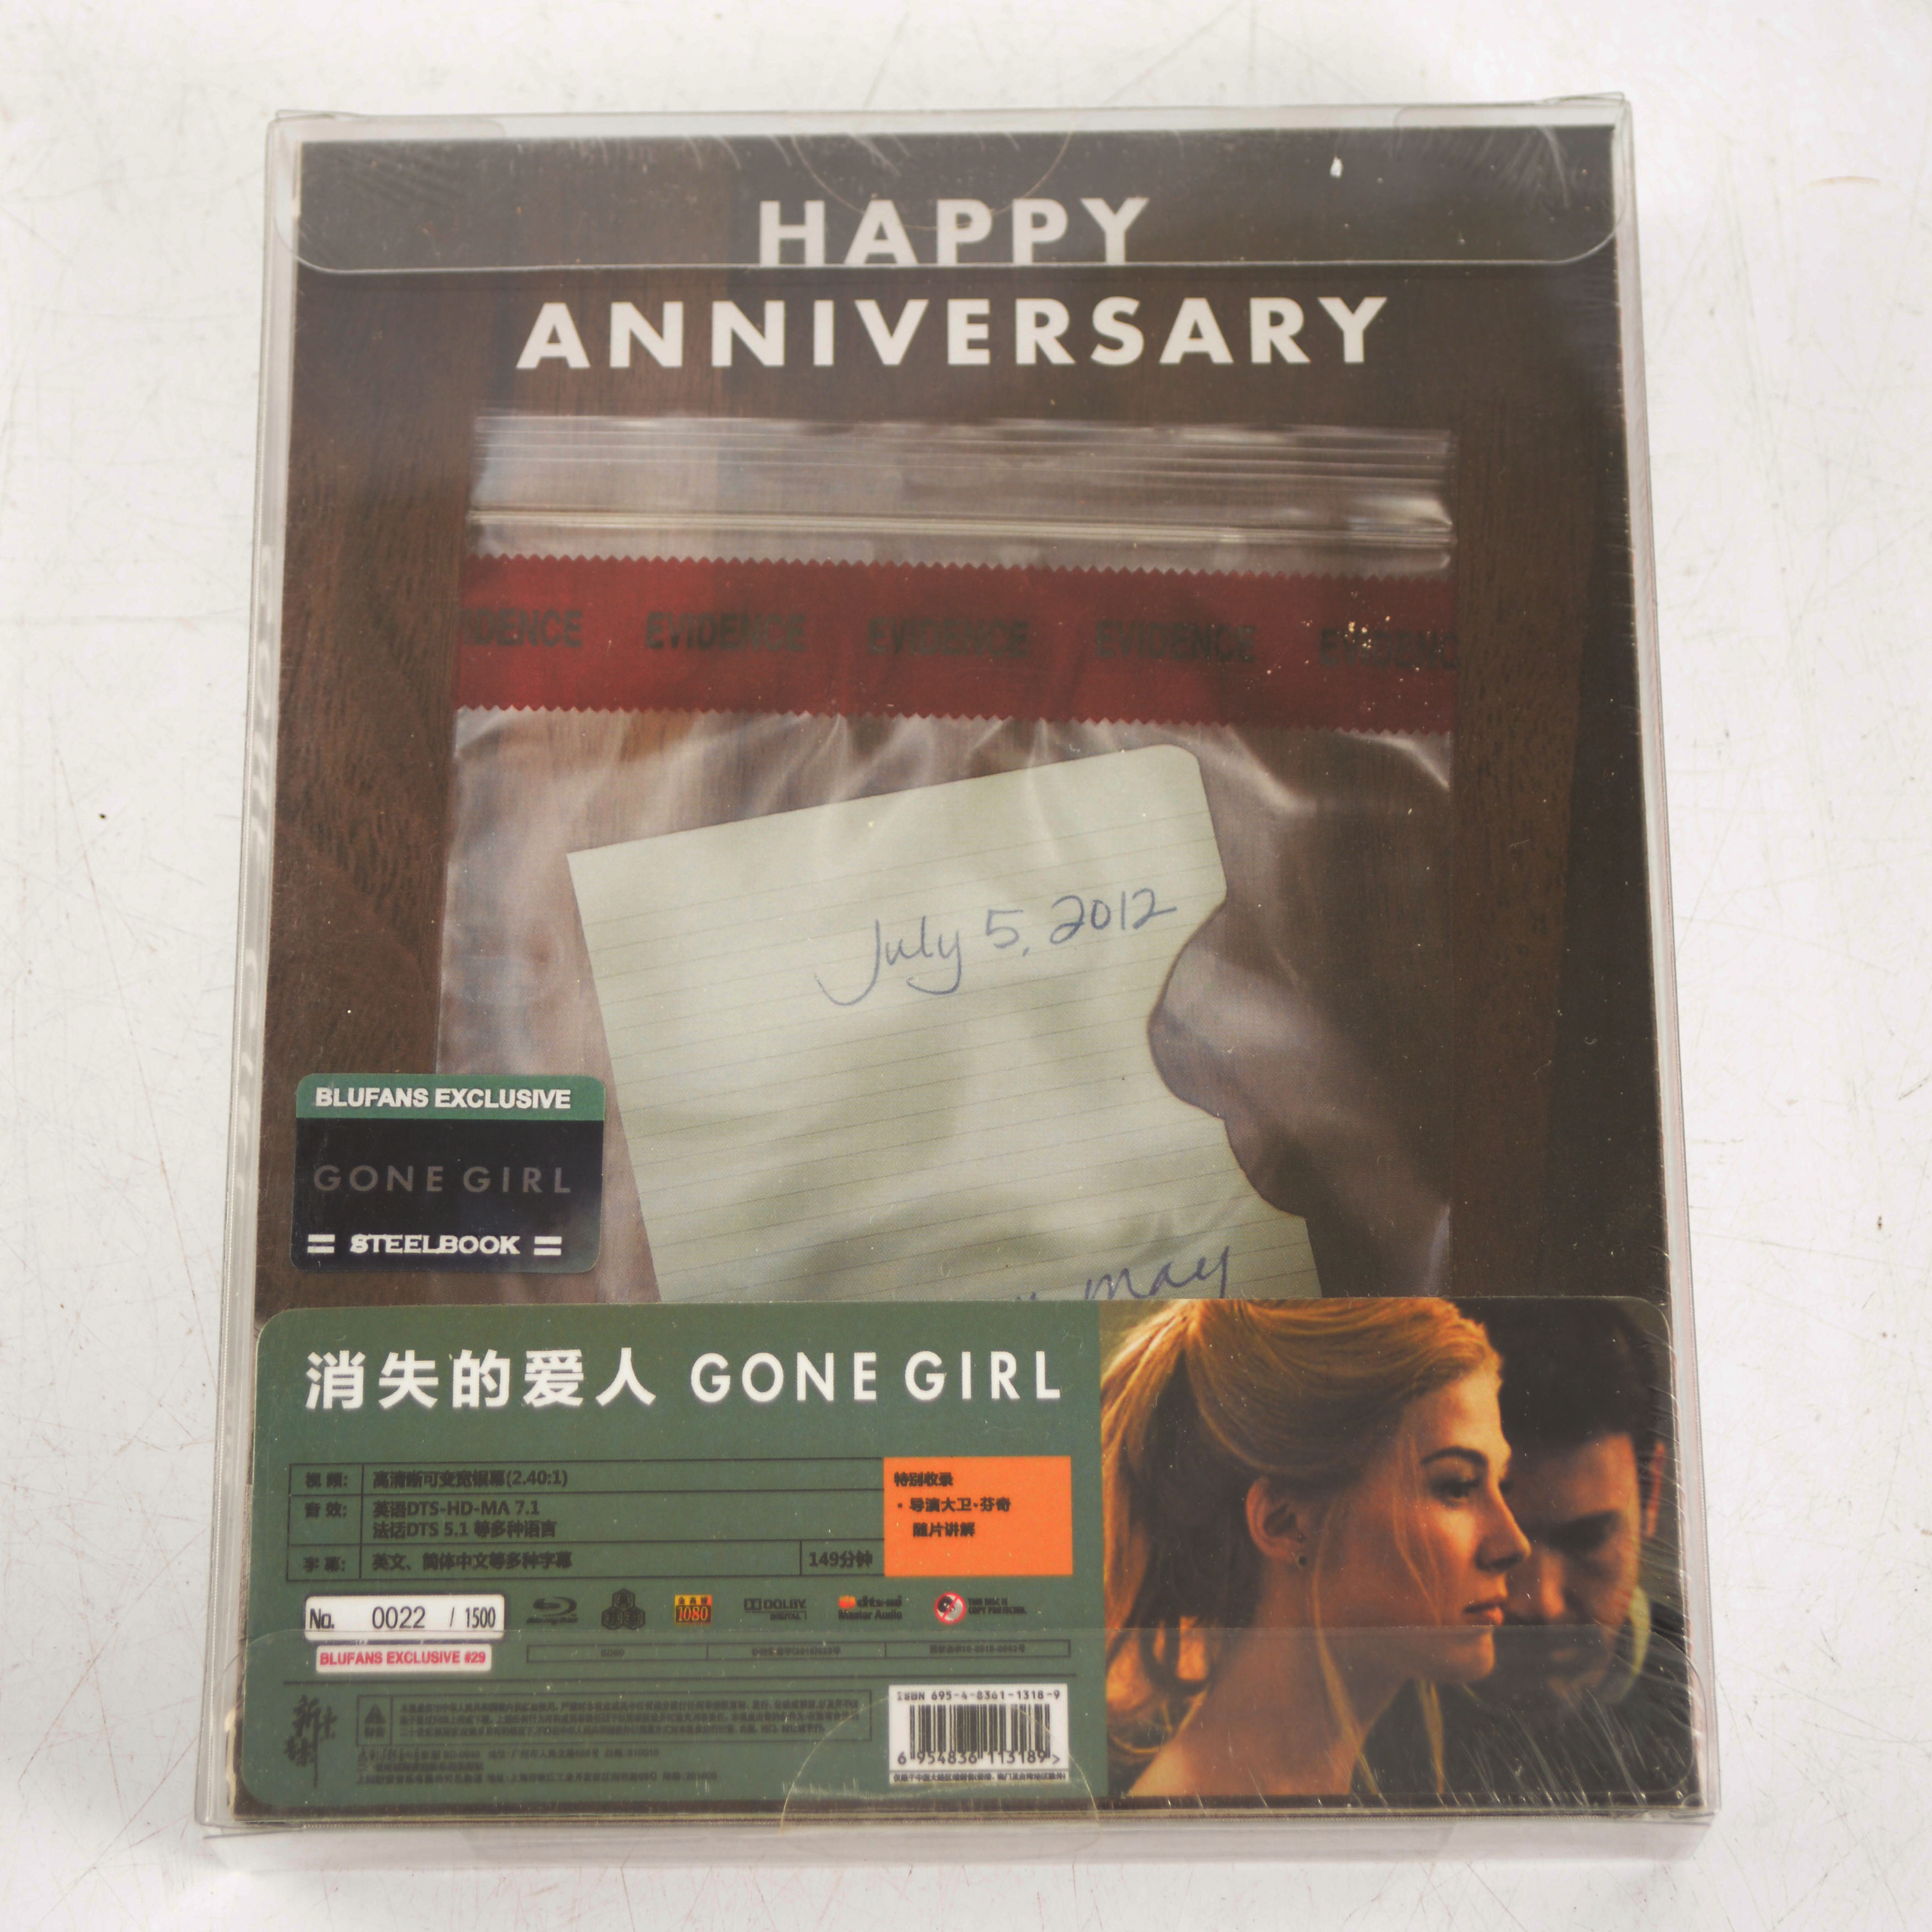 Blufans Exclusive Steelbook Blu-ray, Gone Girl, limited edition 22/1500, sealed. - Image 2 of 2